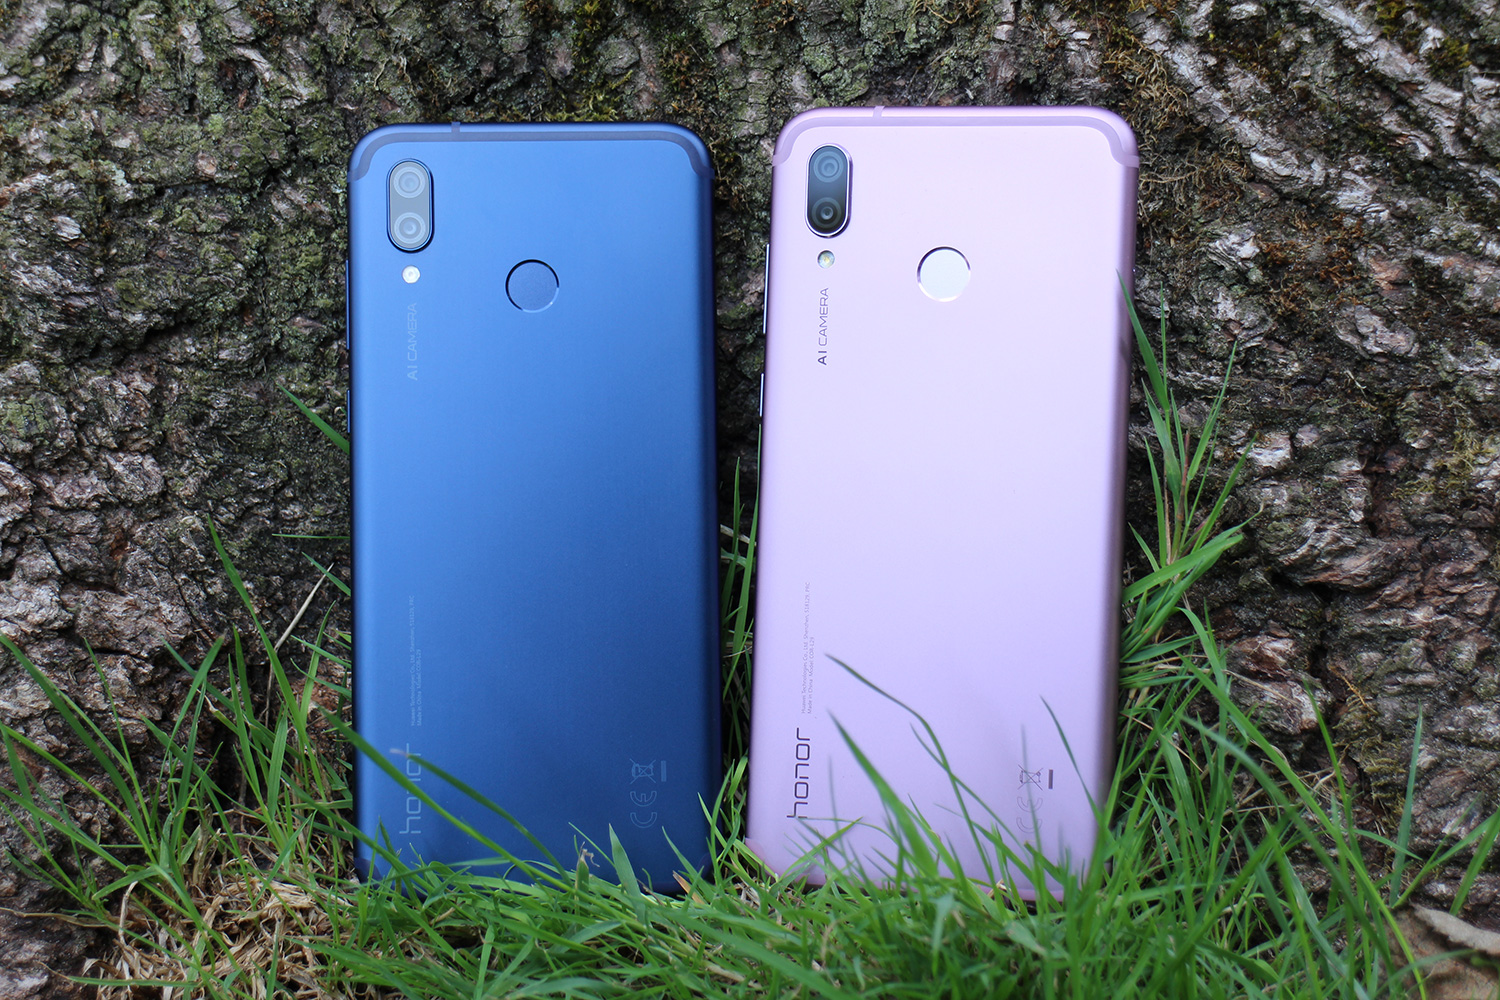 honor play blue and pink models back